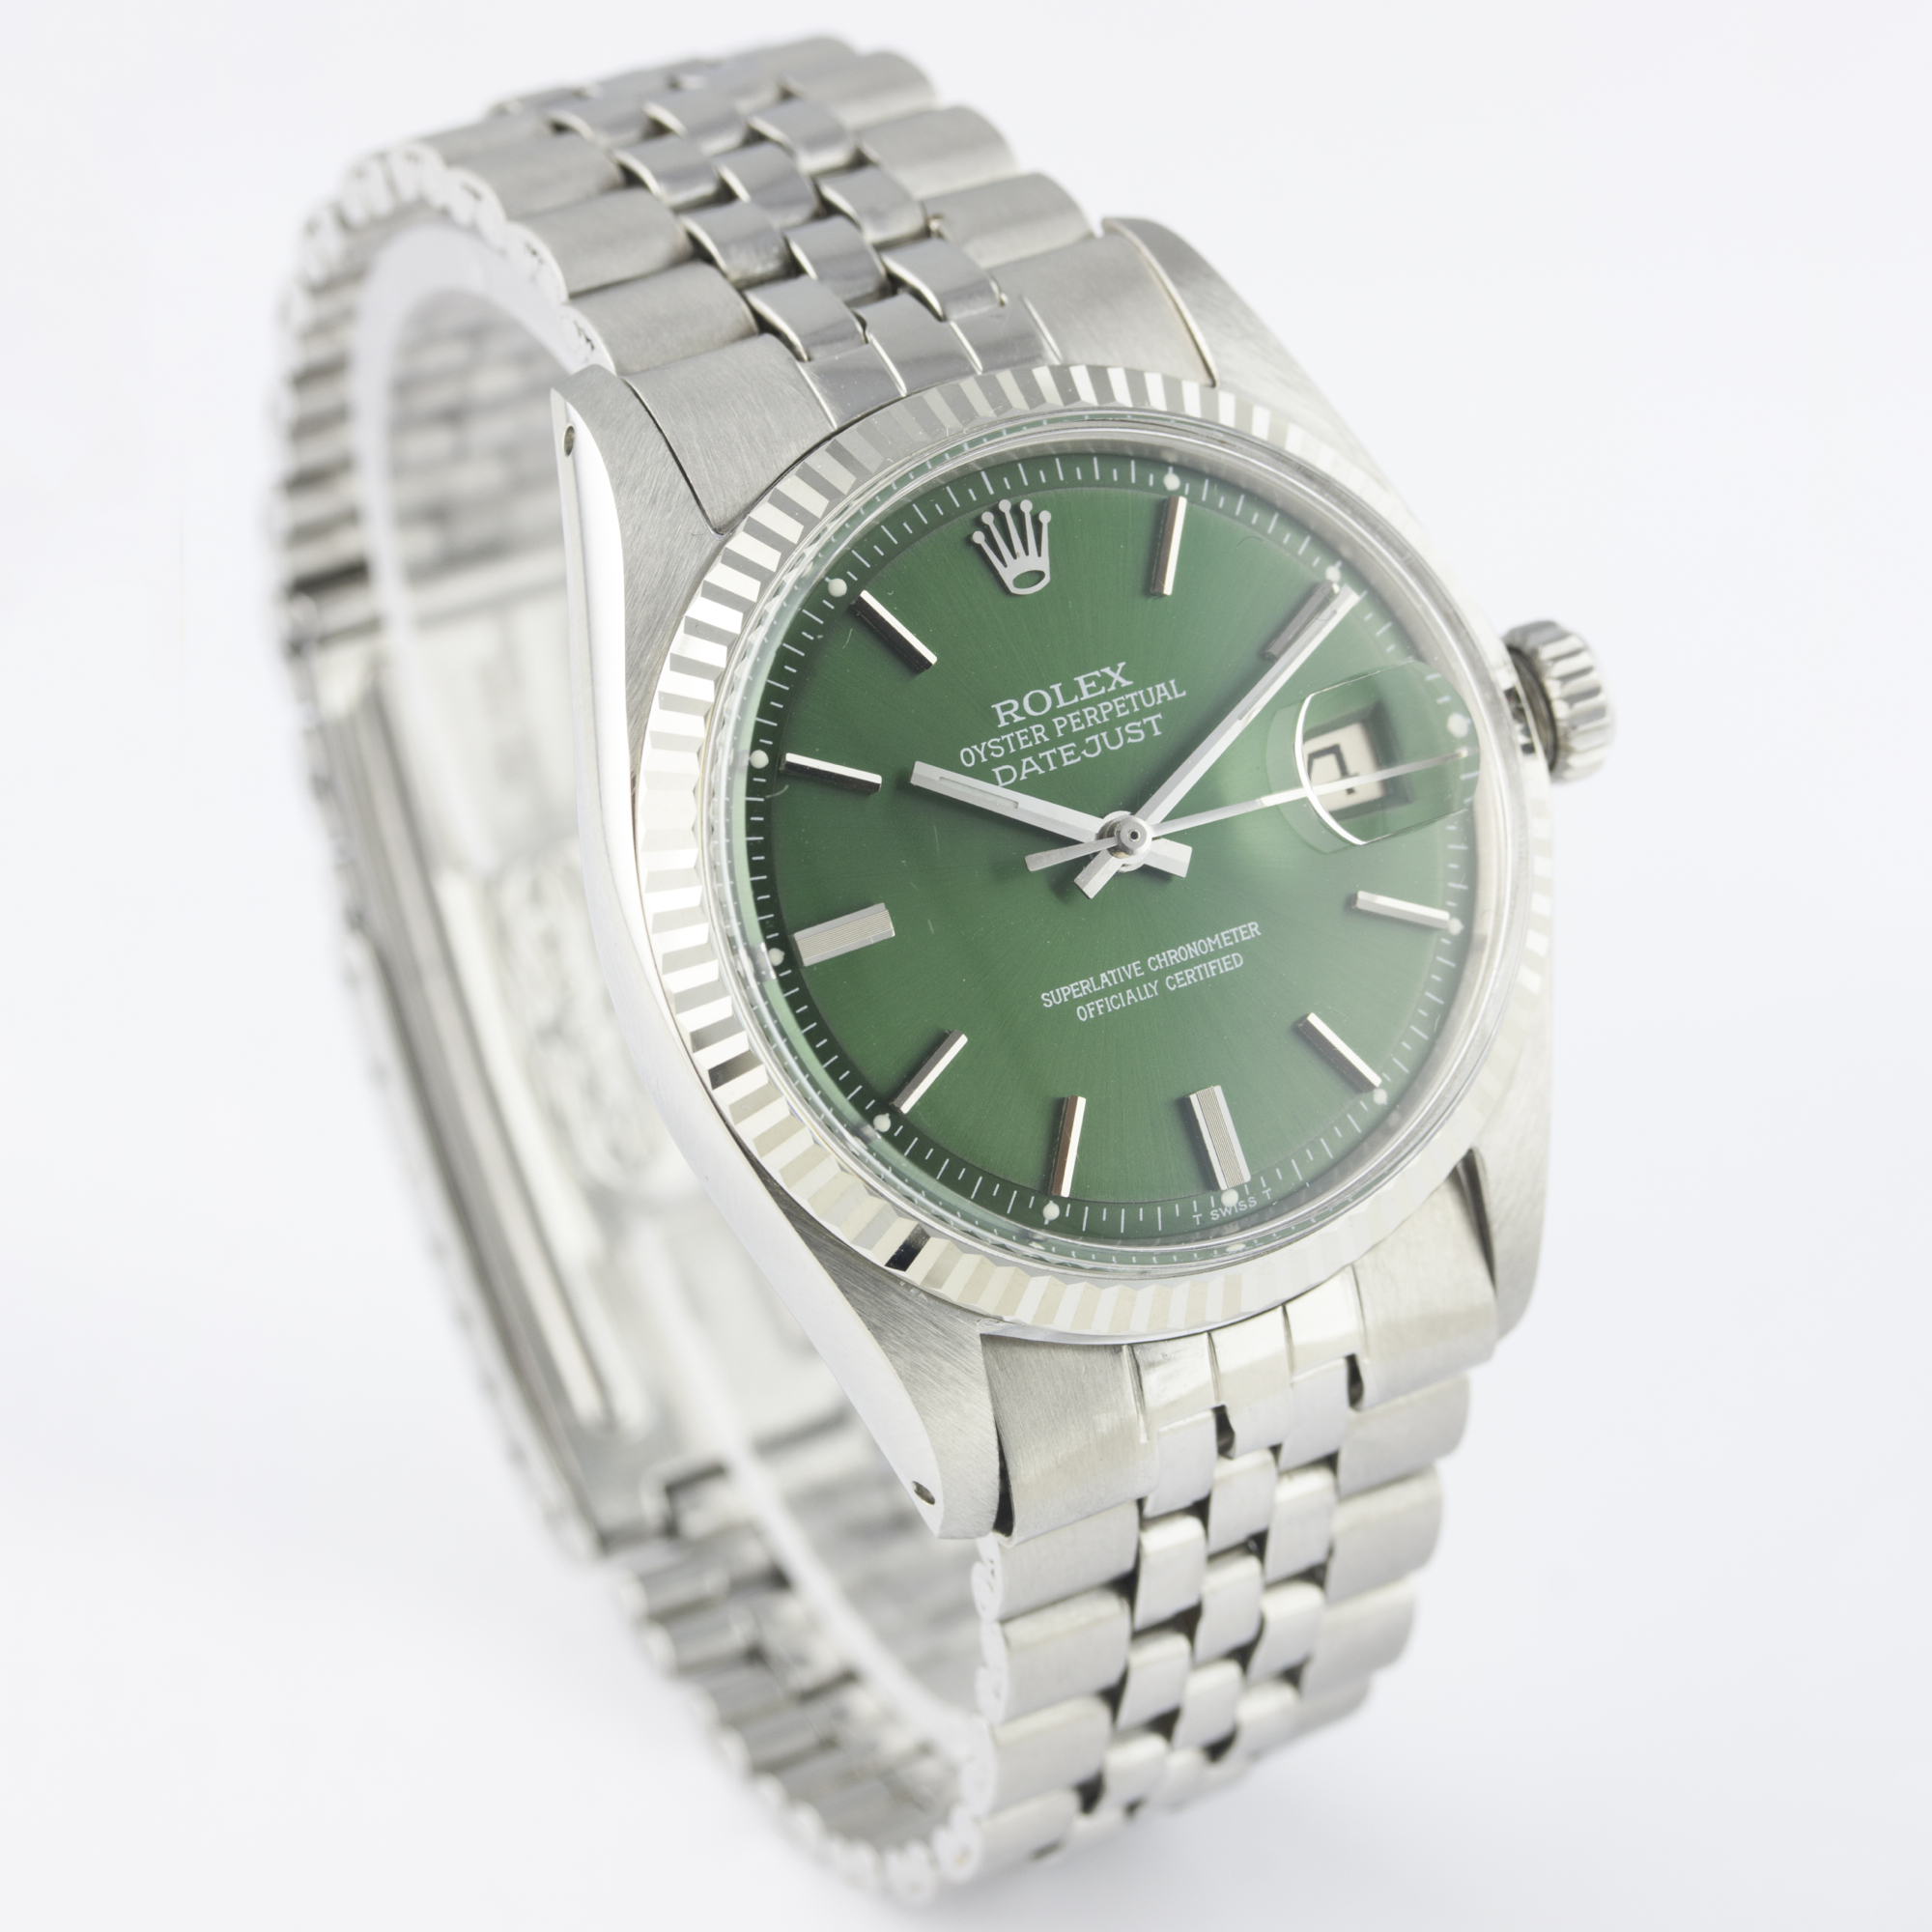 A GENTLEMAN'S STAINLESS STEEL & WHITE GOLD ROLEX OYSTER PERPETUAL DATEJUST BRACELET WATCH CIRCA - Image 5 of 10